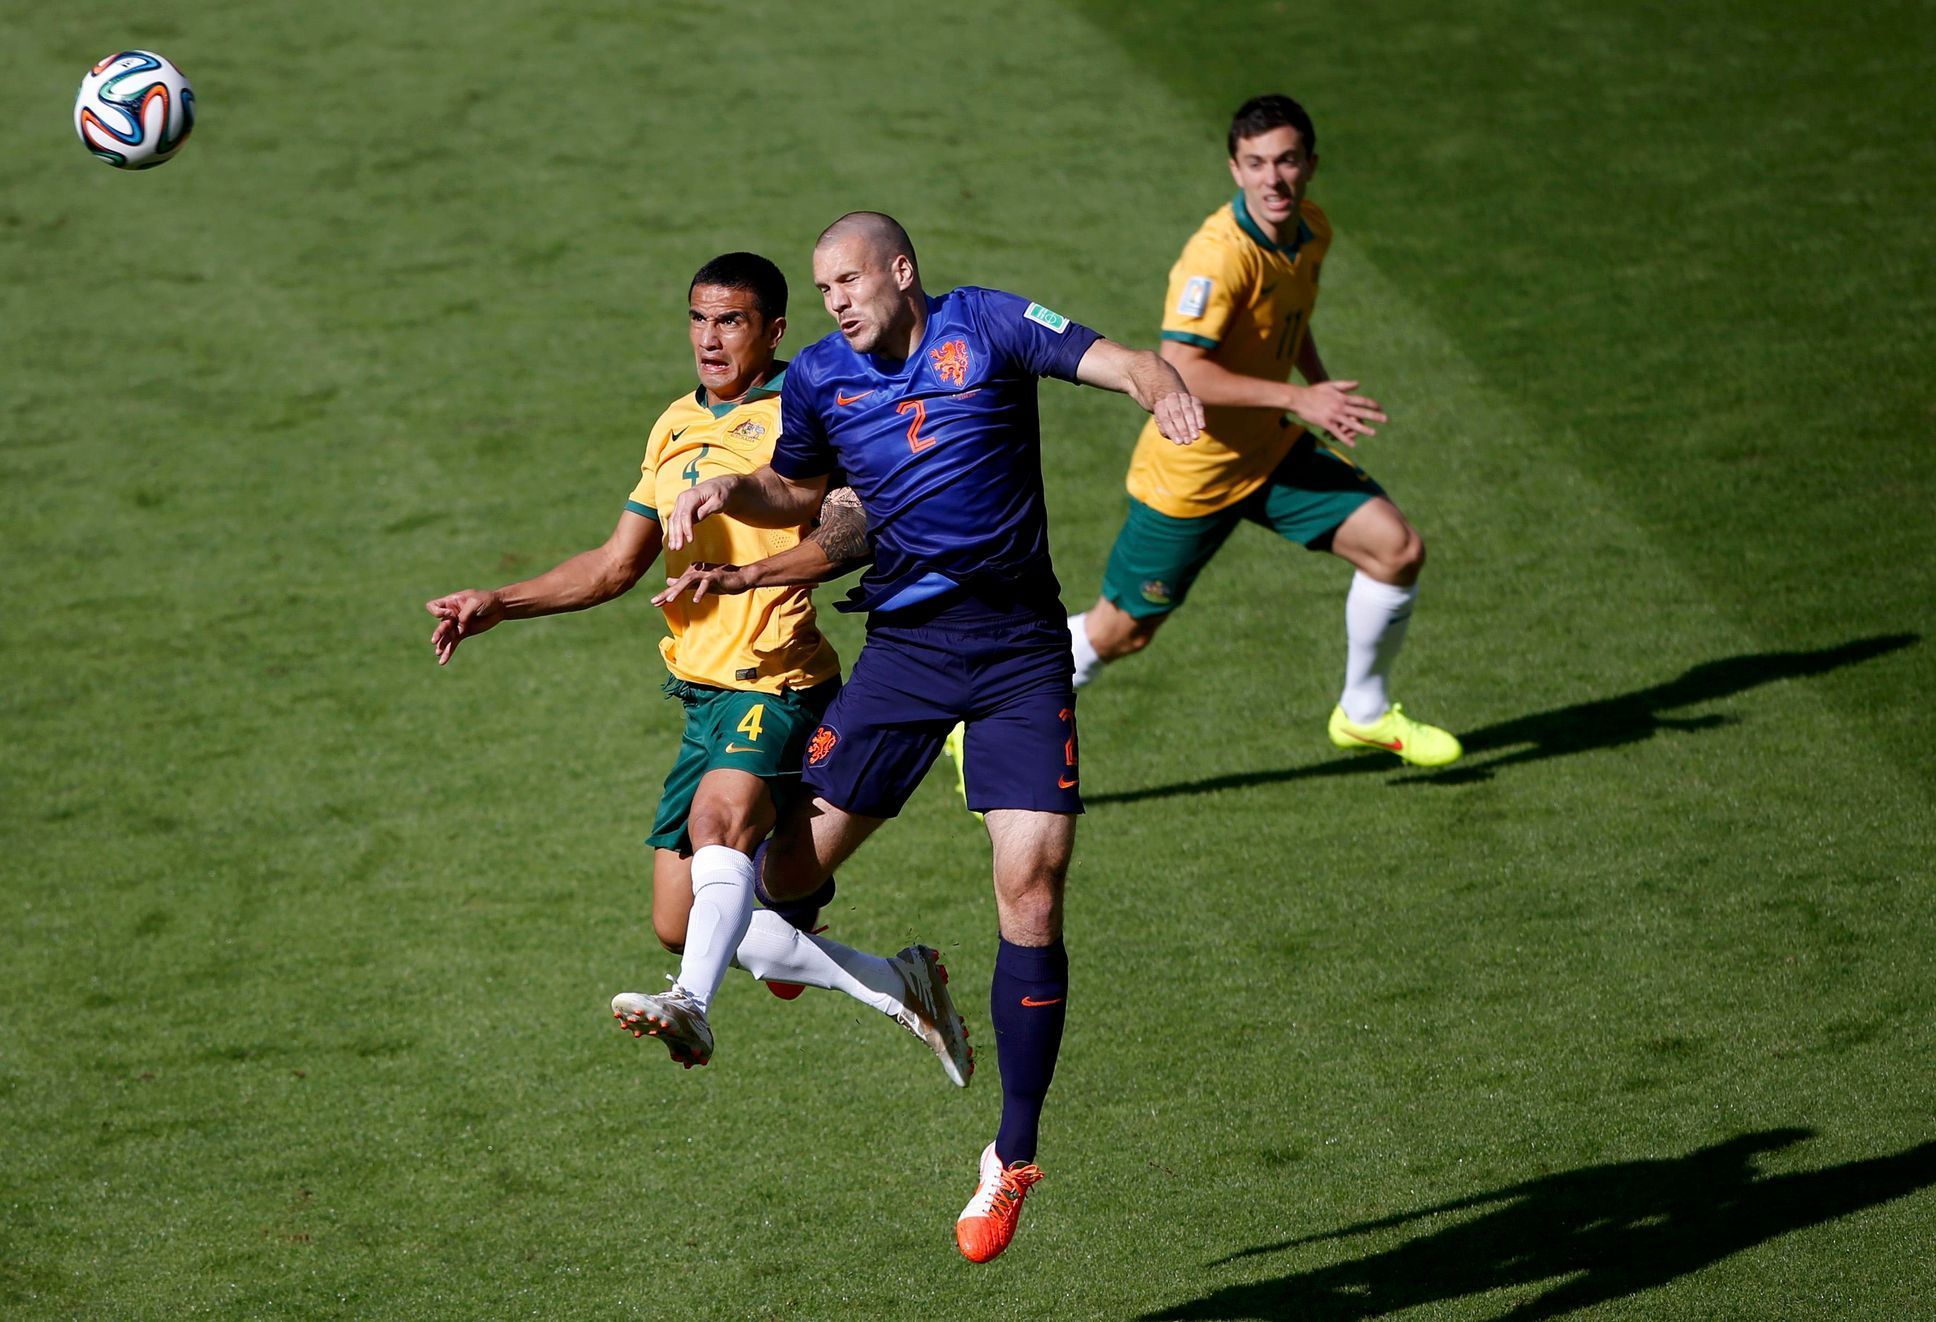 Australia's Cahill and Vlaar of the Netherlands fight for the ball during their 2014 World Cup Group B soccer match at the Beira Rio stadium in Porto Alegre